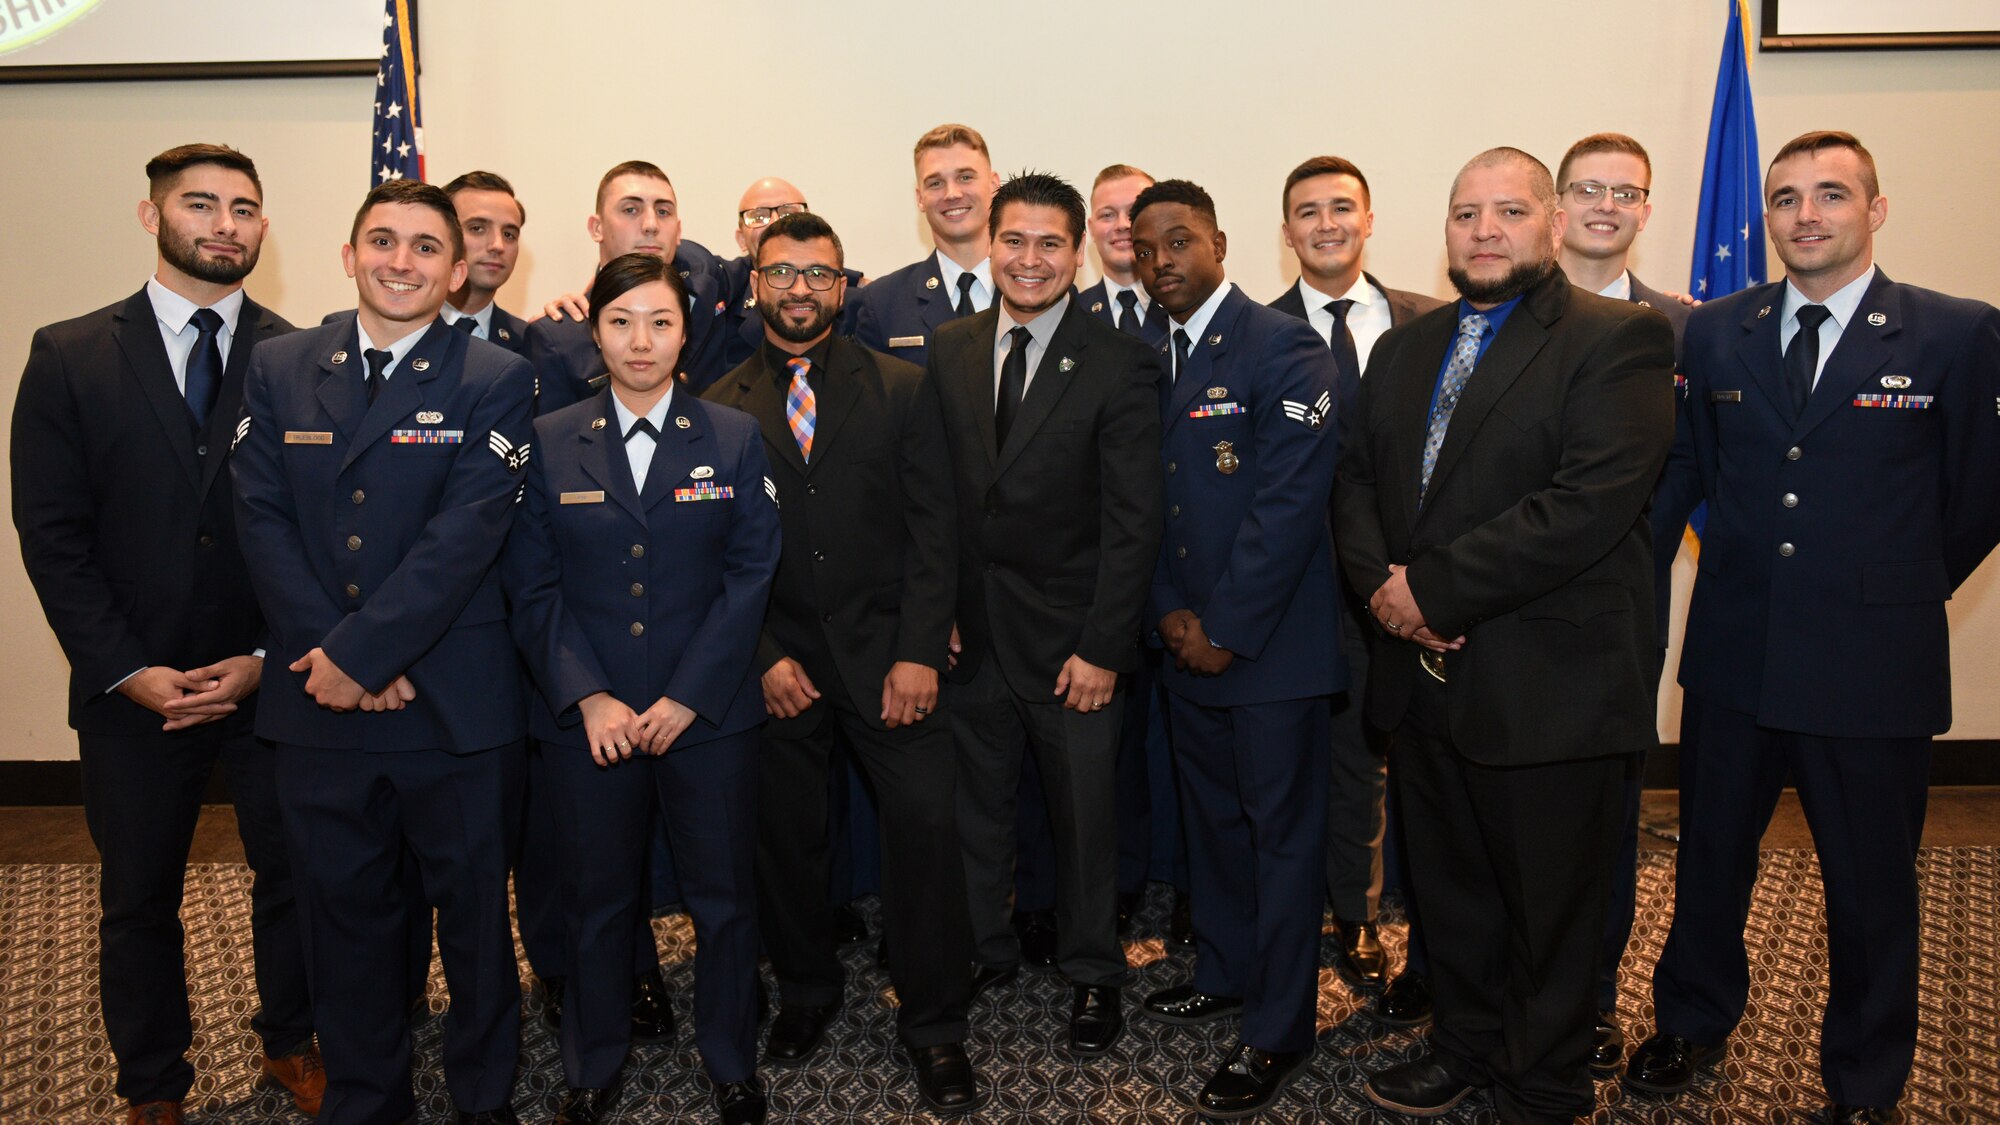 Airmen and civilian graduates of Airman Leadership School pose for a group photo after successfully completing their training during the ALS Graduation on the event center at Goodfellow Air Force Base, Texas, August 22, 2019. Goodfellow hosted personnel from Laughlin AFB and Ohio National Guard to participate in the four-week leadership course. (U.S. Air Force photo by Airman 1st Class Robyn Hunsinger/Released)